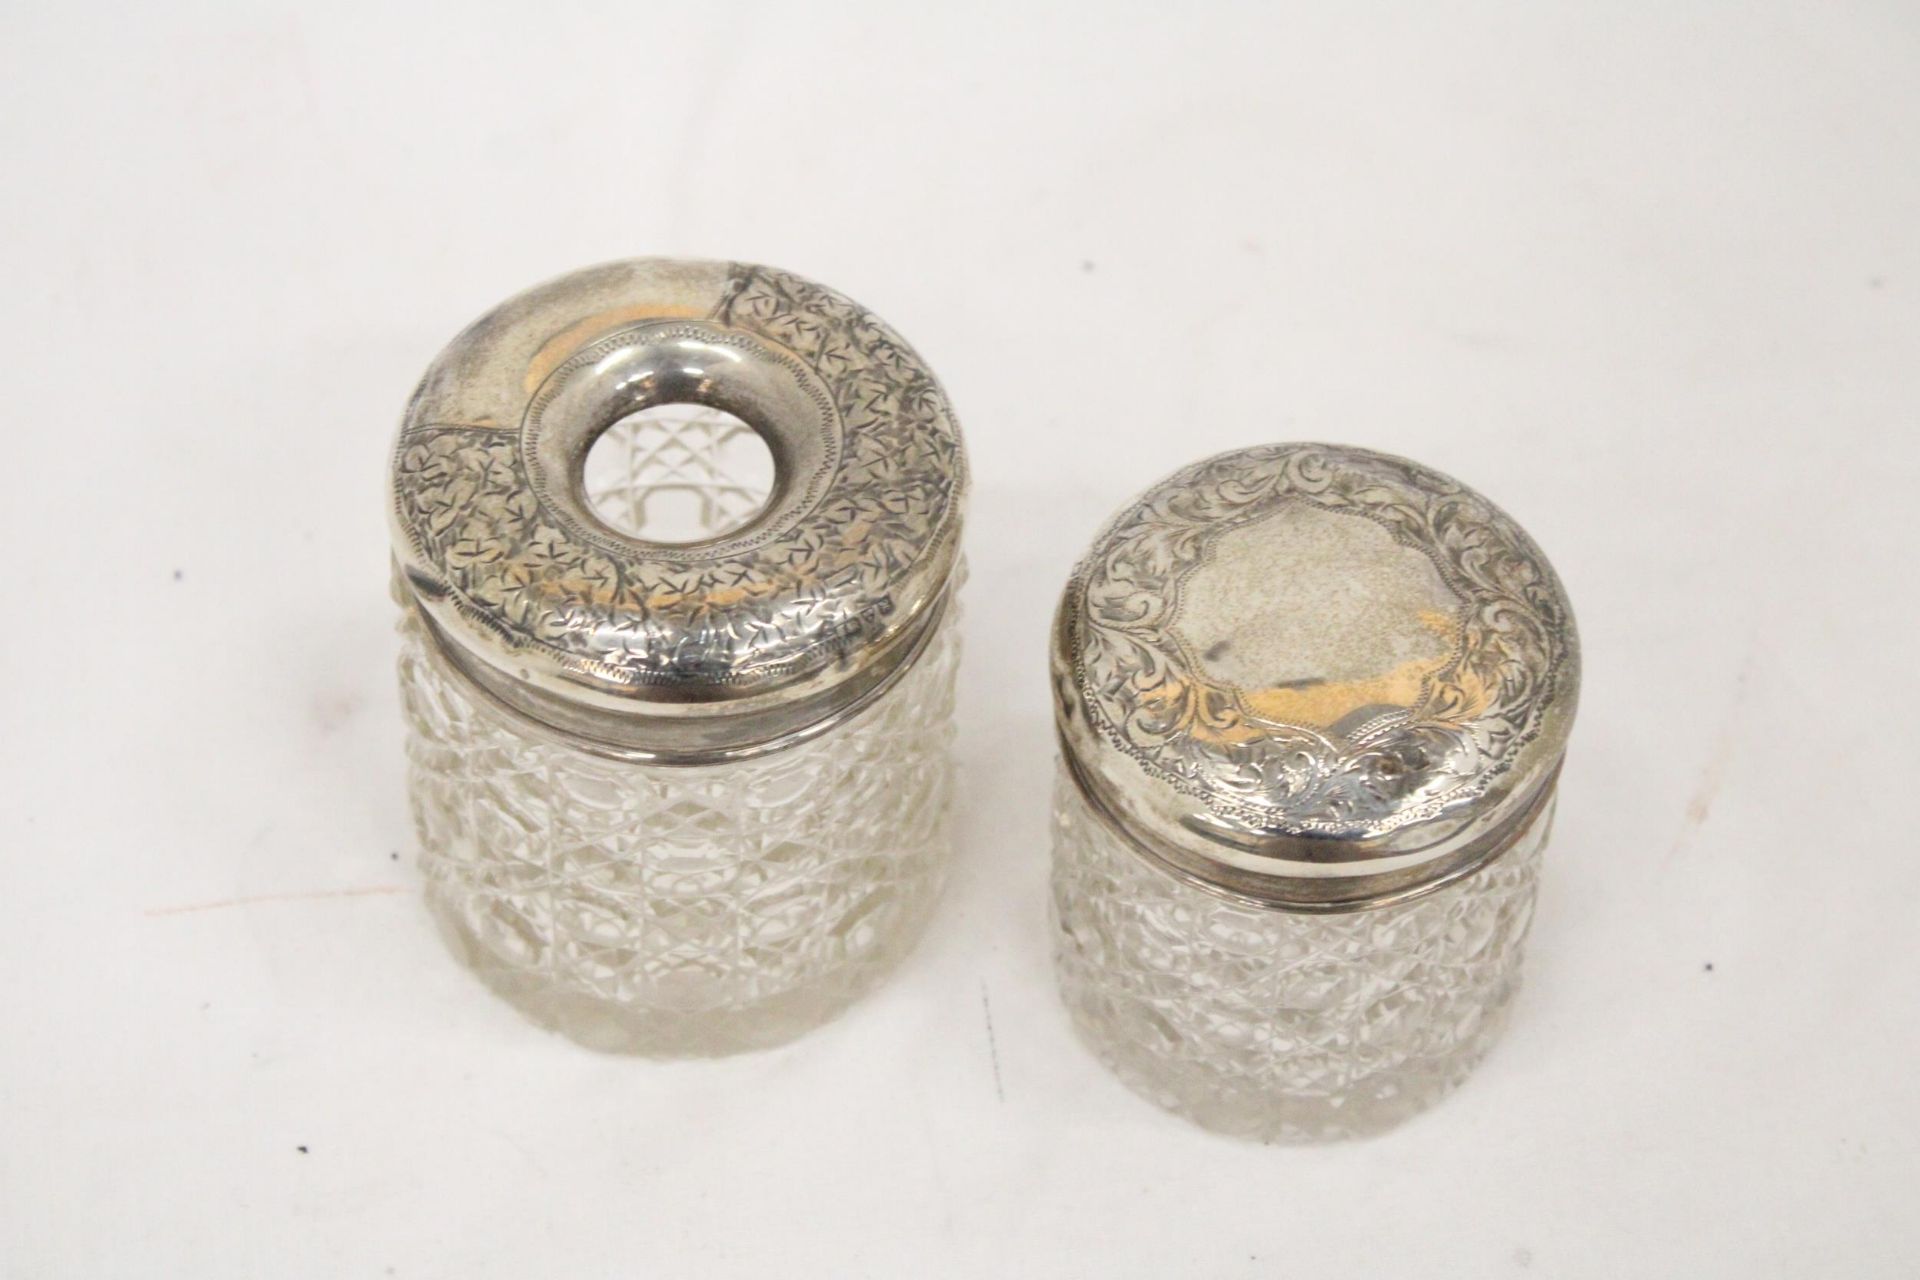 A STERLING SILVER TOP HAIR PIN JAR TOGETHER WITH A SILVER TOPPED COCKTAIL STICK HOLDER